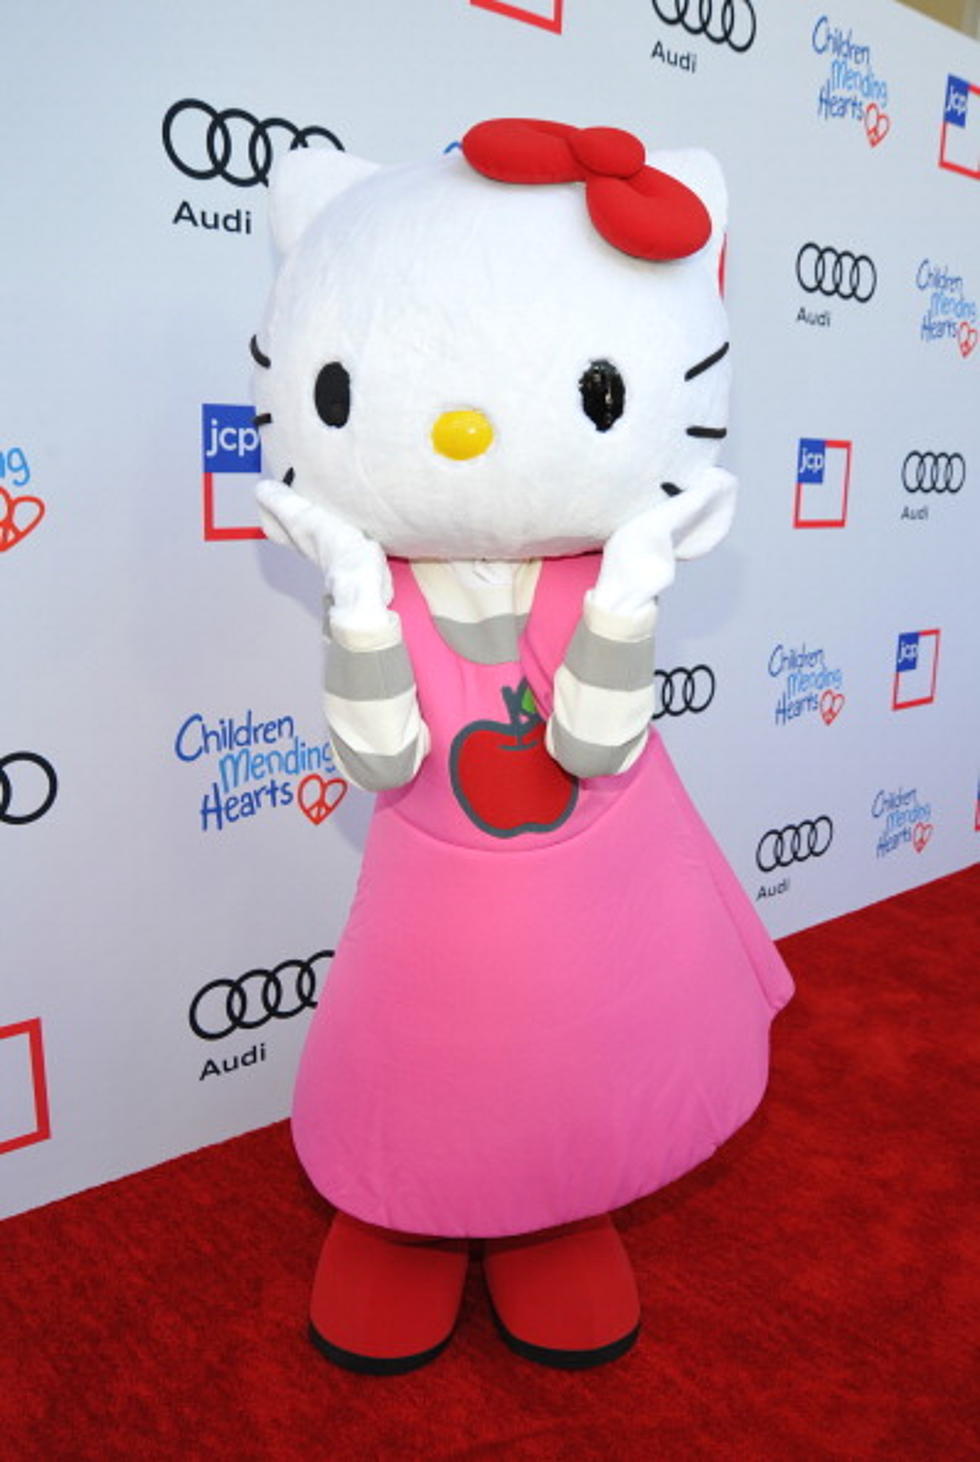 How is Hello Kitty Not a Cat?